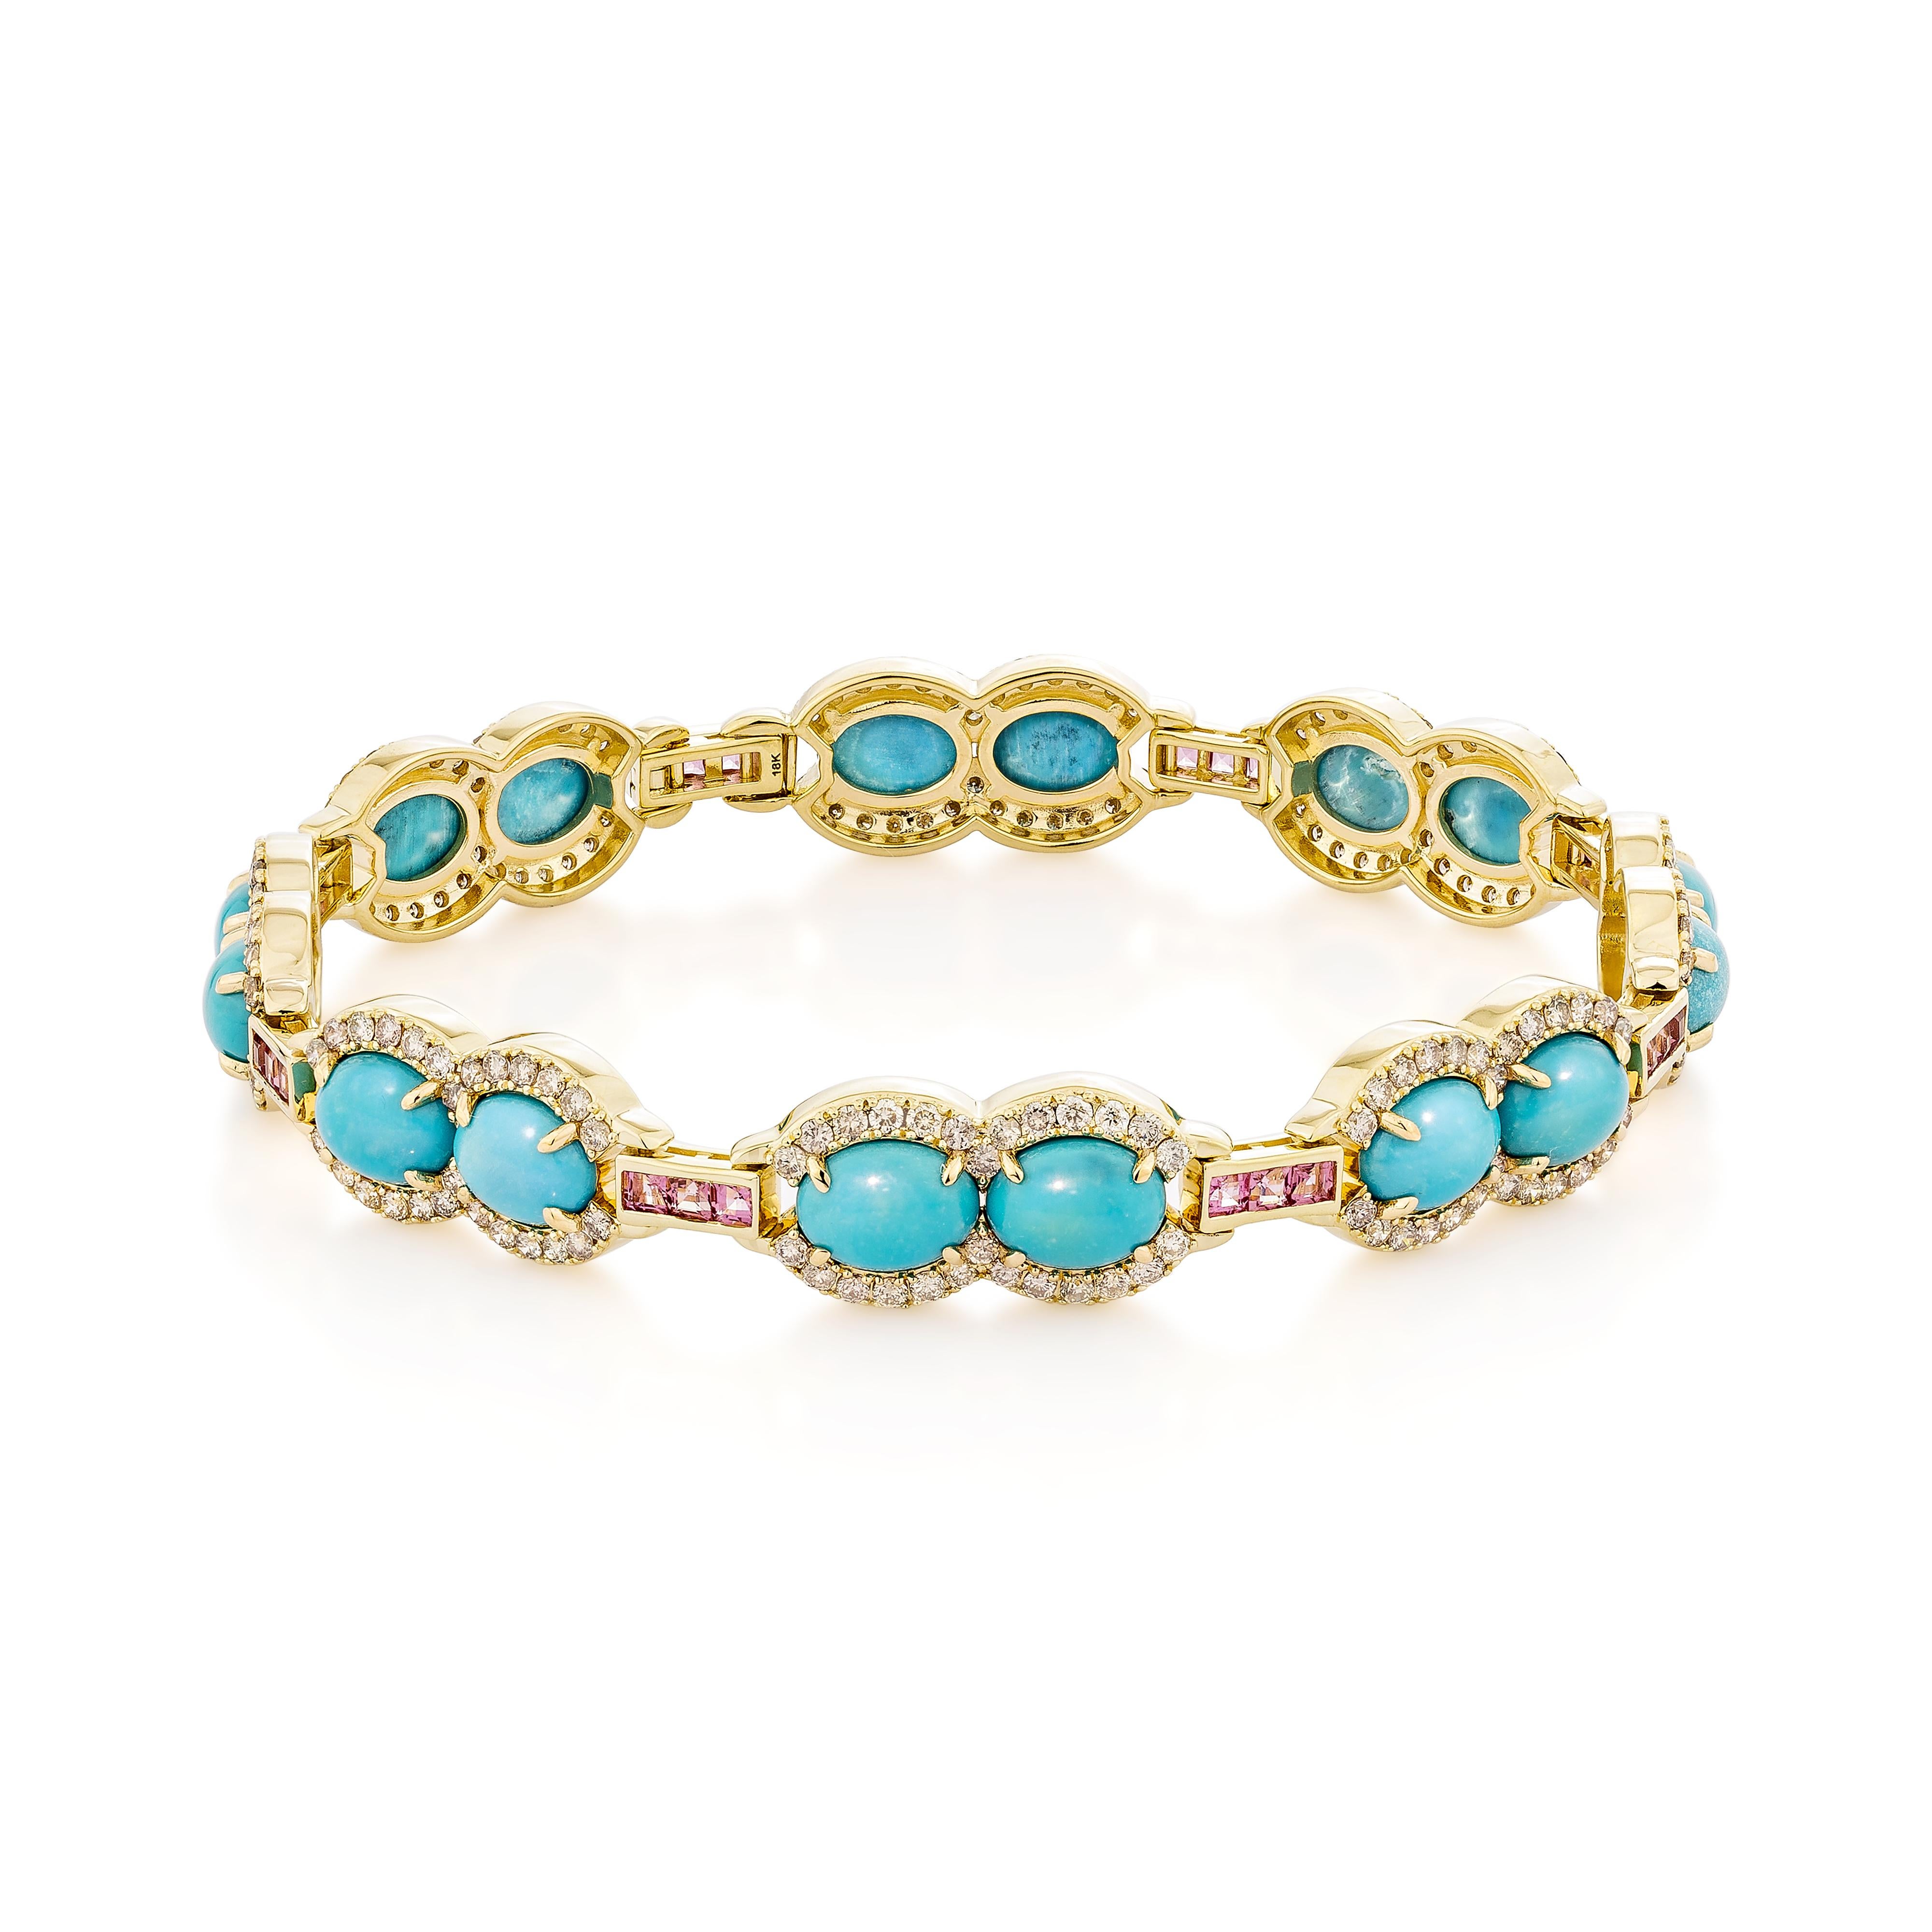 Oval Cut 16.55 Carat Turquoise Bracelet in 14KYG with Pink Tourmaline and White Diamond. For Sale